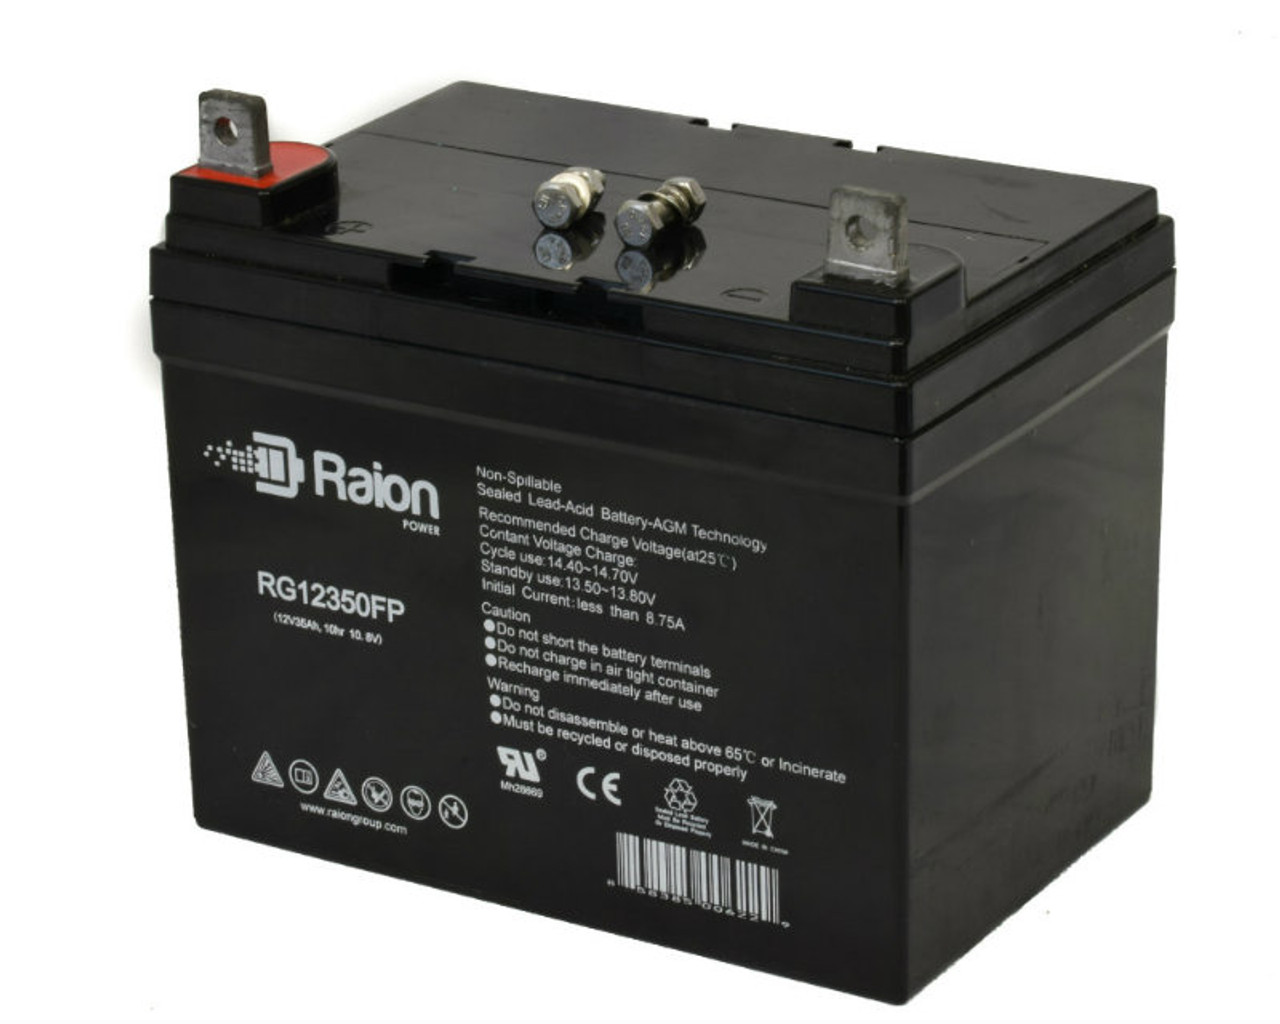 Raion Power Replacement 12V 35Ah RG12350FP Mobility Scooter Battery for Drive Medical Cirrus Plus EC